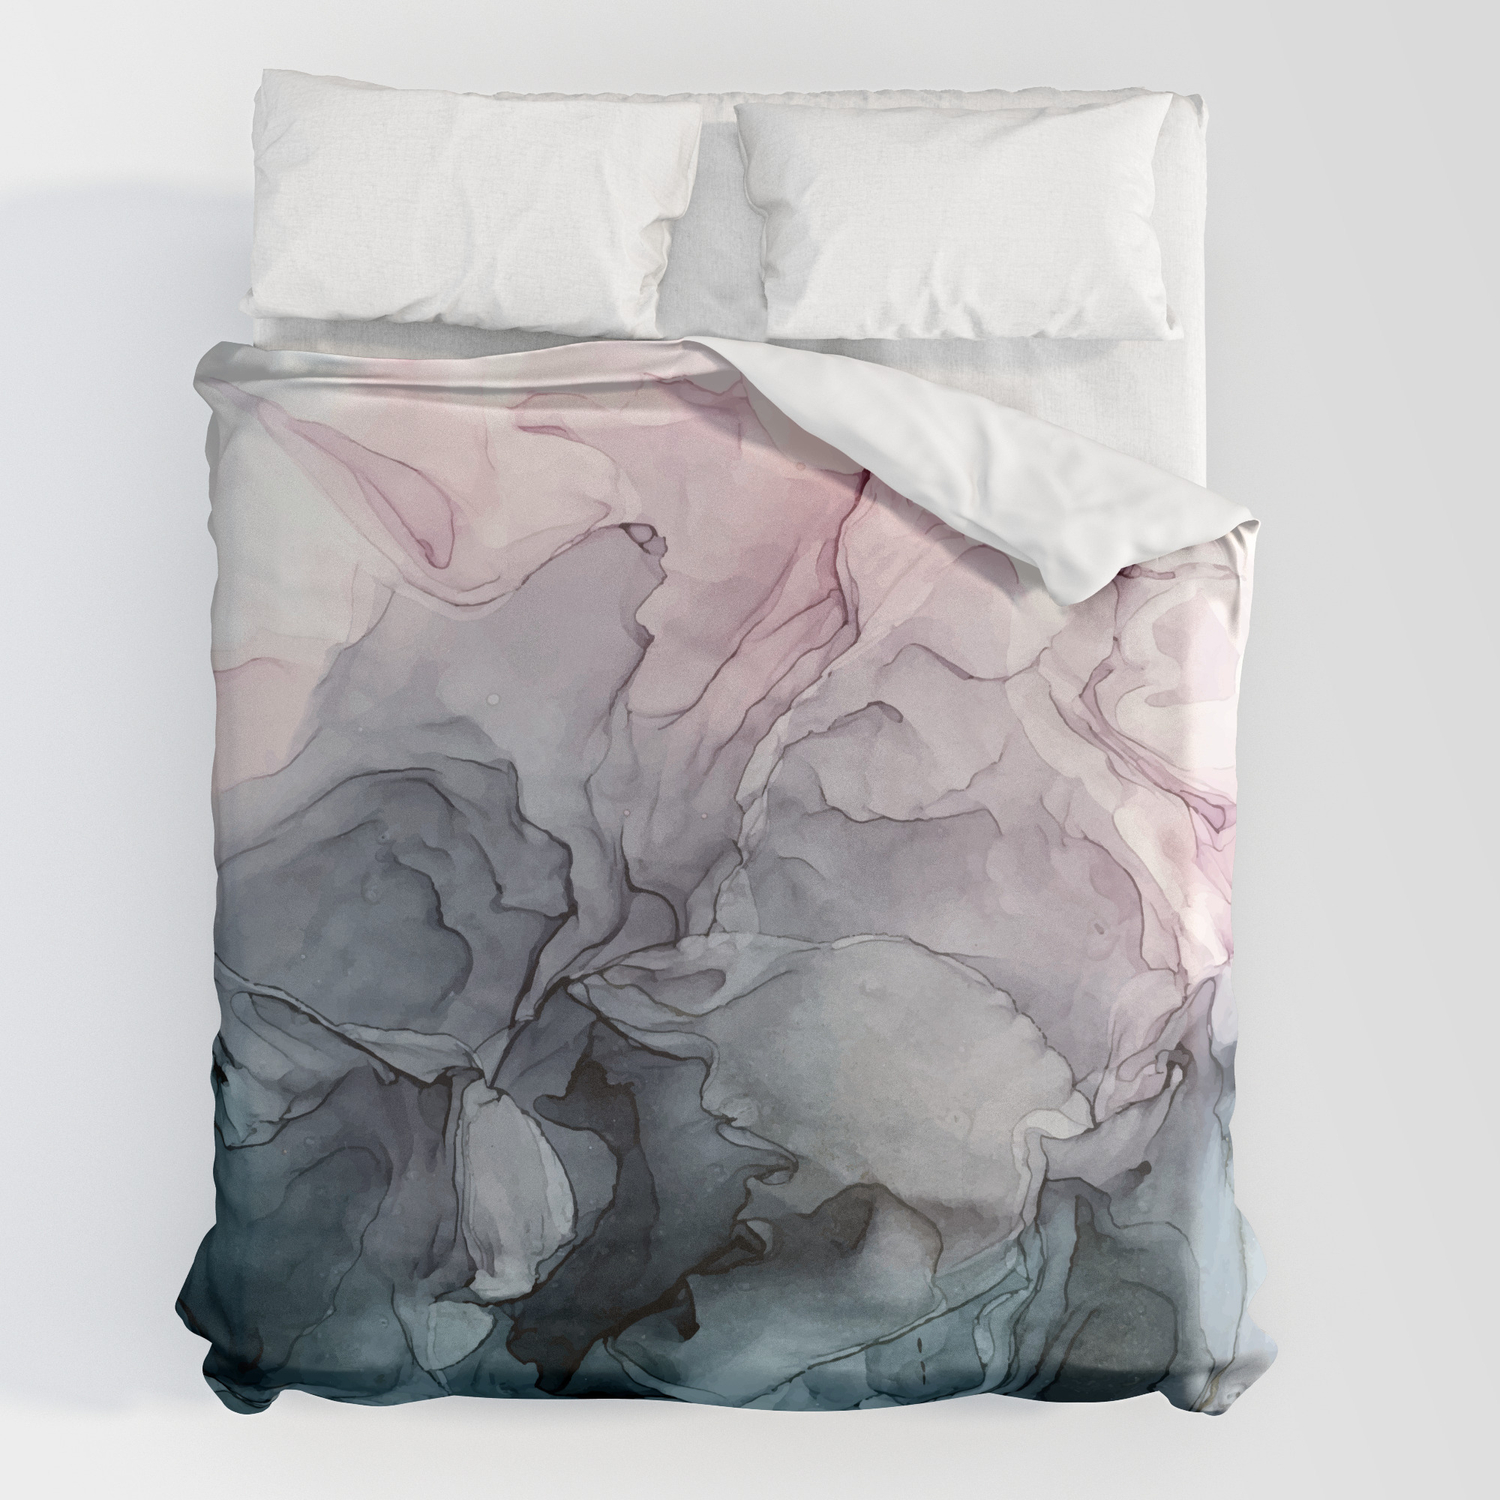 Blush And Payne S Grey Flowing Abstract, Pink And Grey Duvet Cover